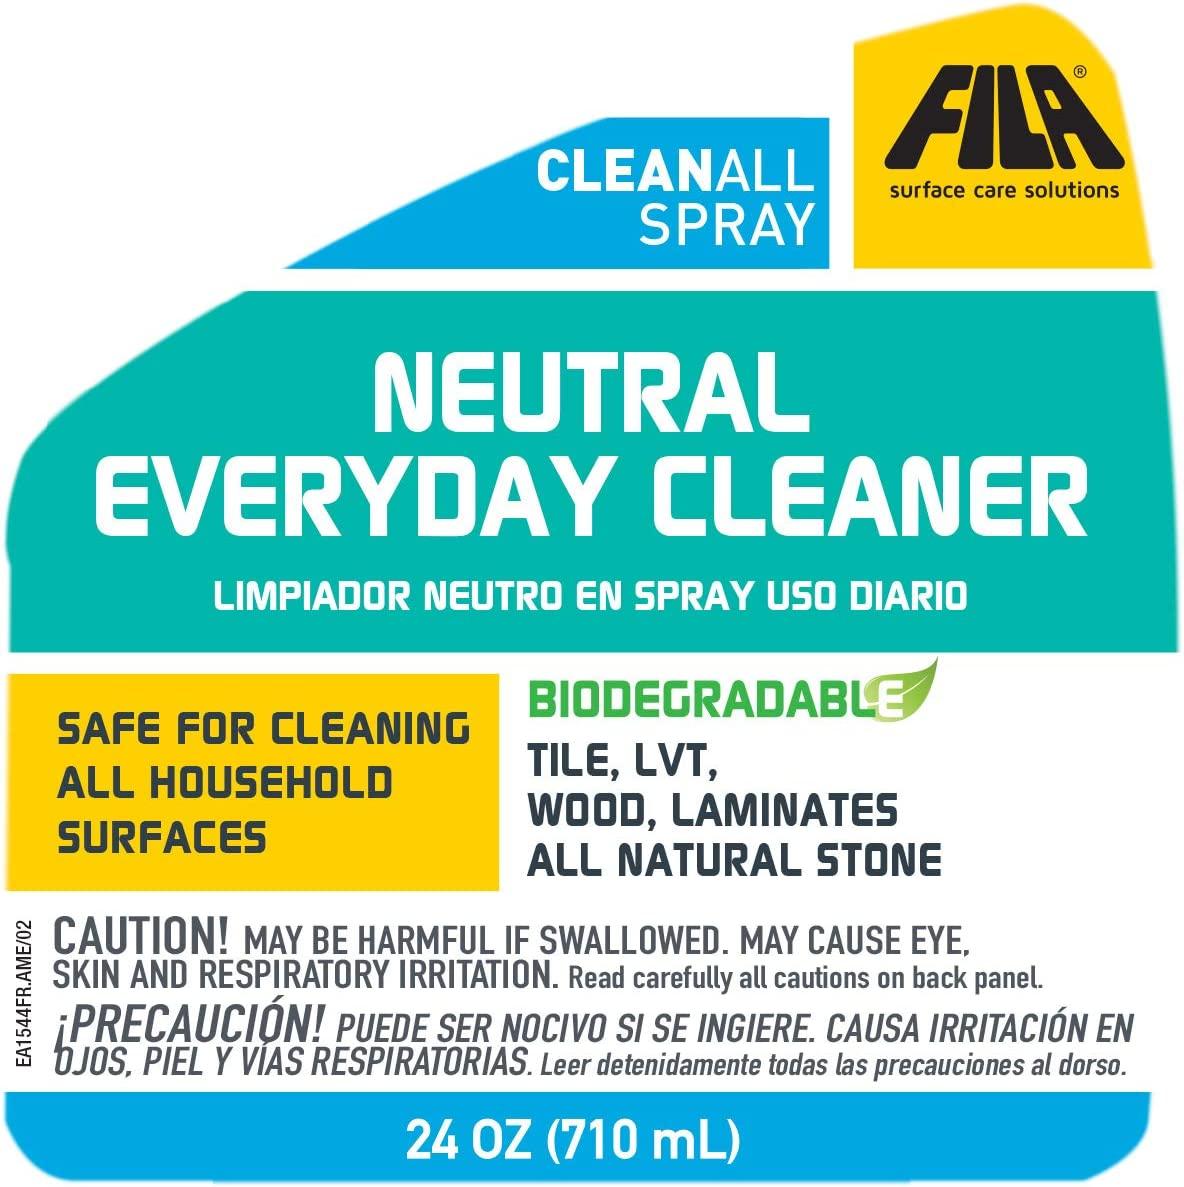 FILA Surface Care Solutions CLEANALL SPRAY Neutral All-Purpose Cleaner  Spray, 24 OZ